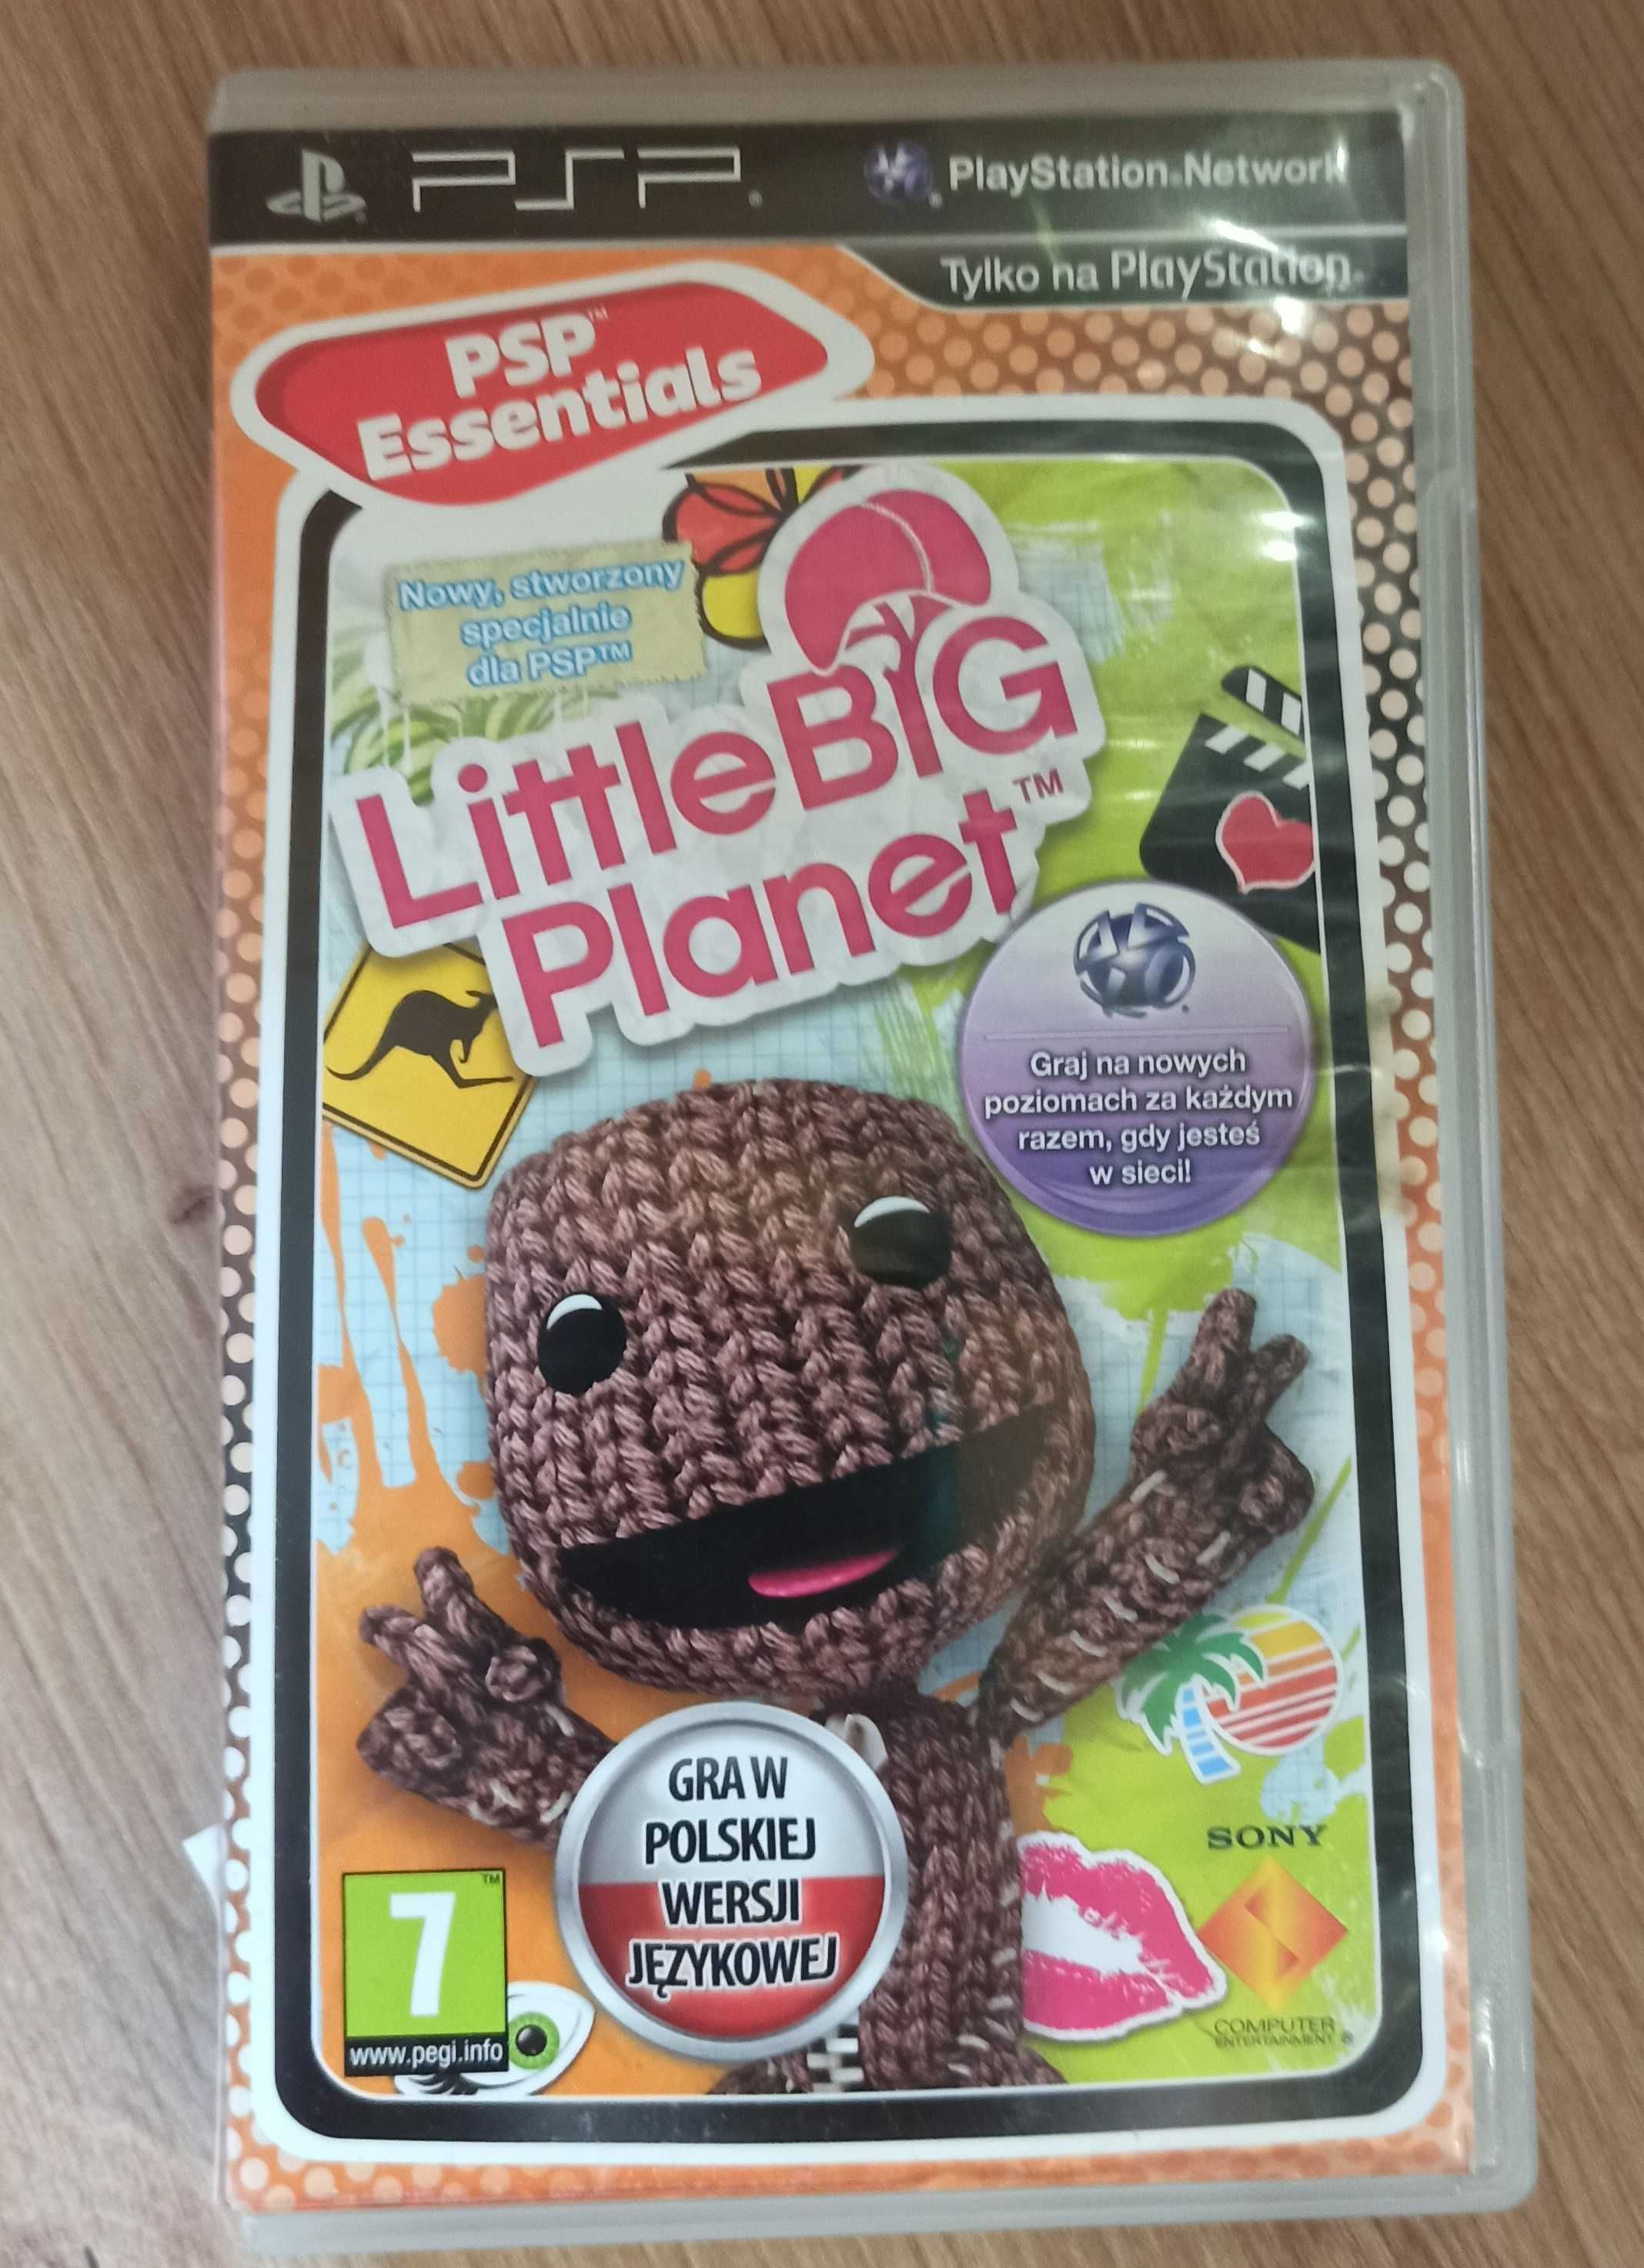 Little Big Planet PSP - Lombard Central Pabianice